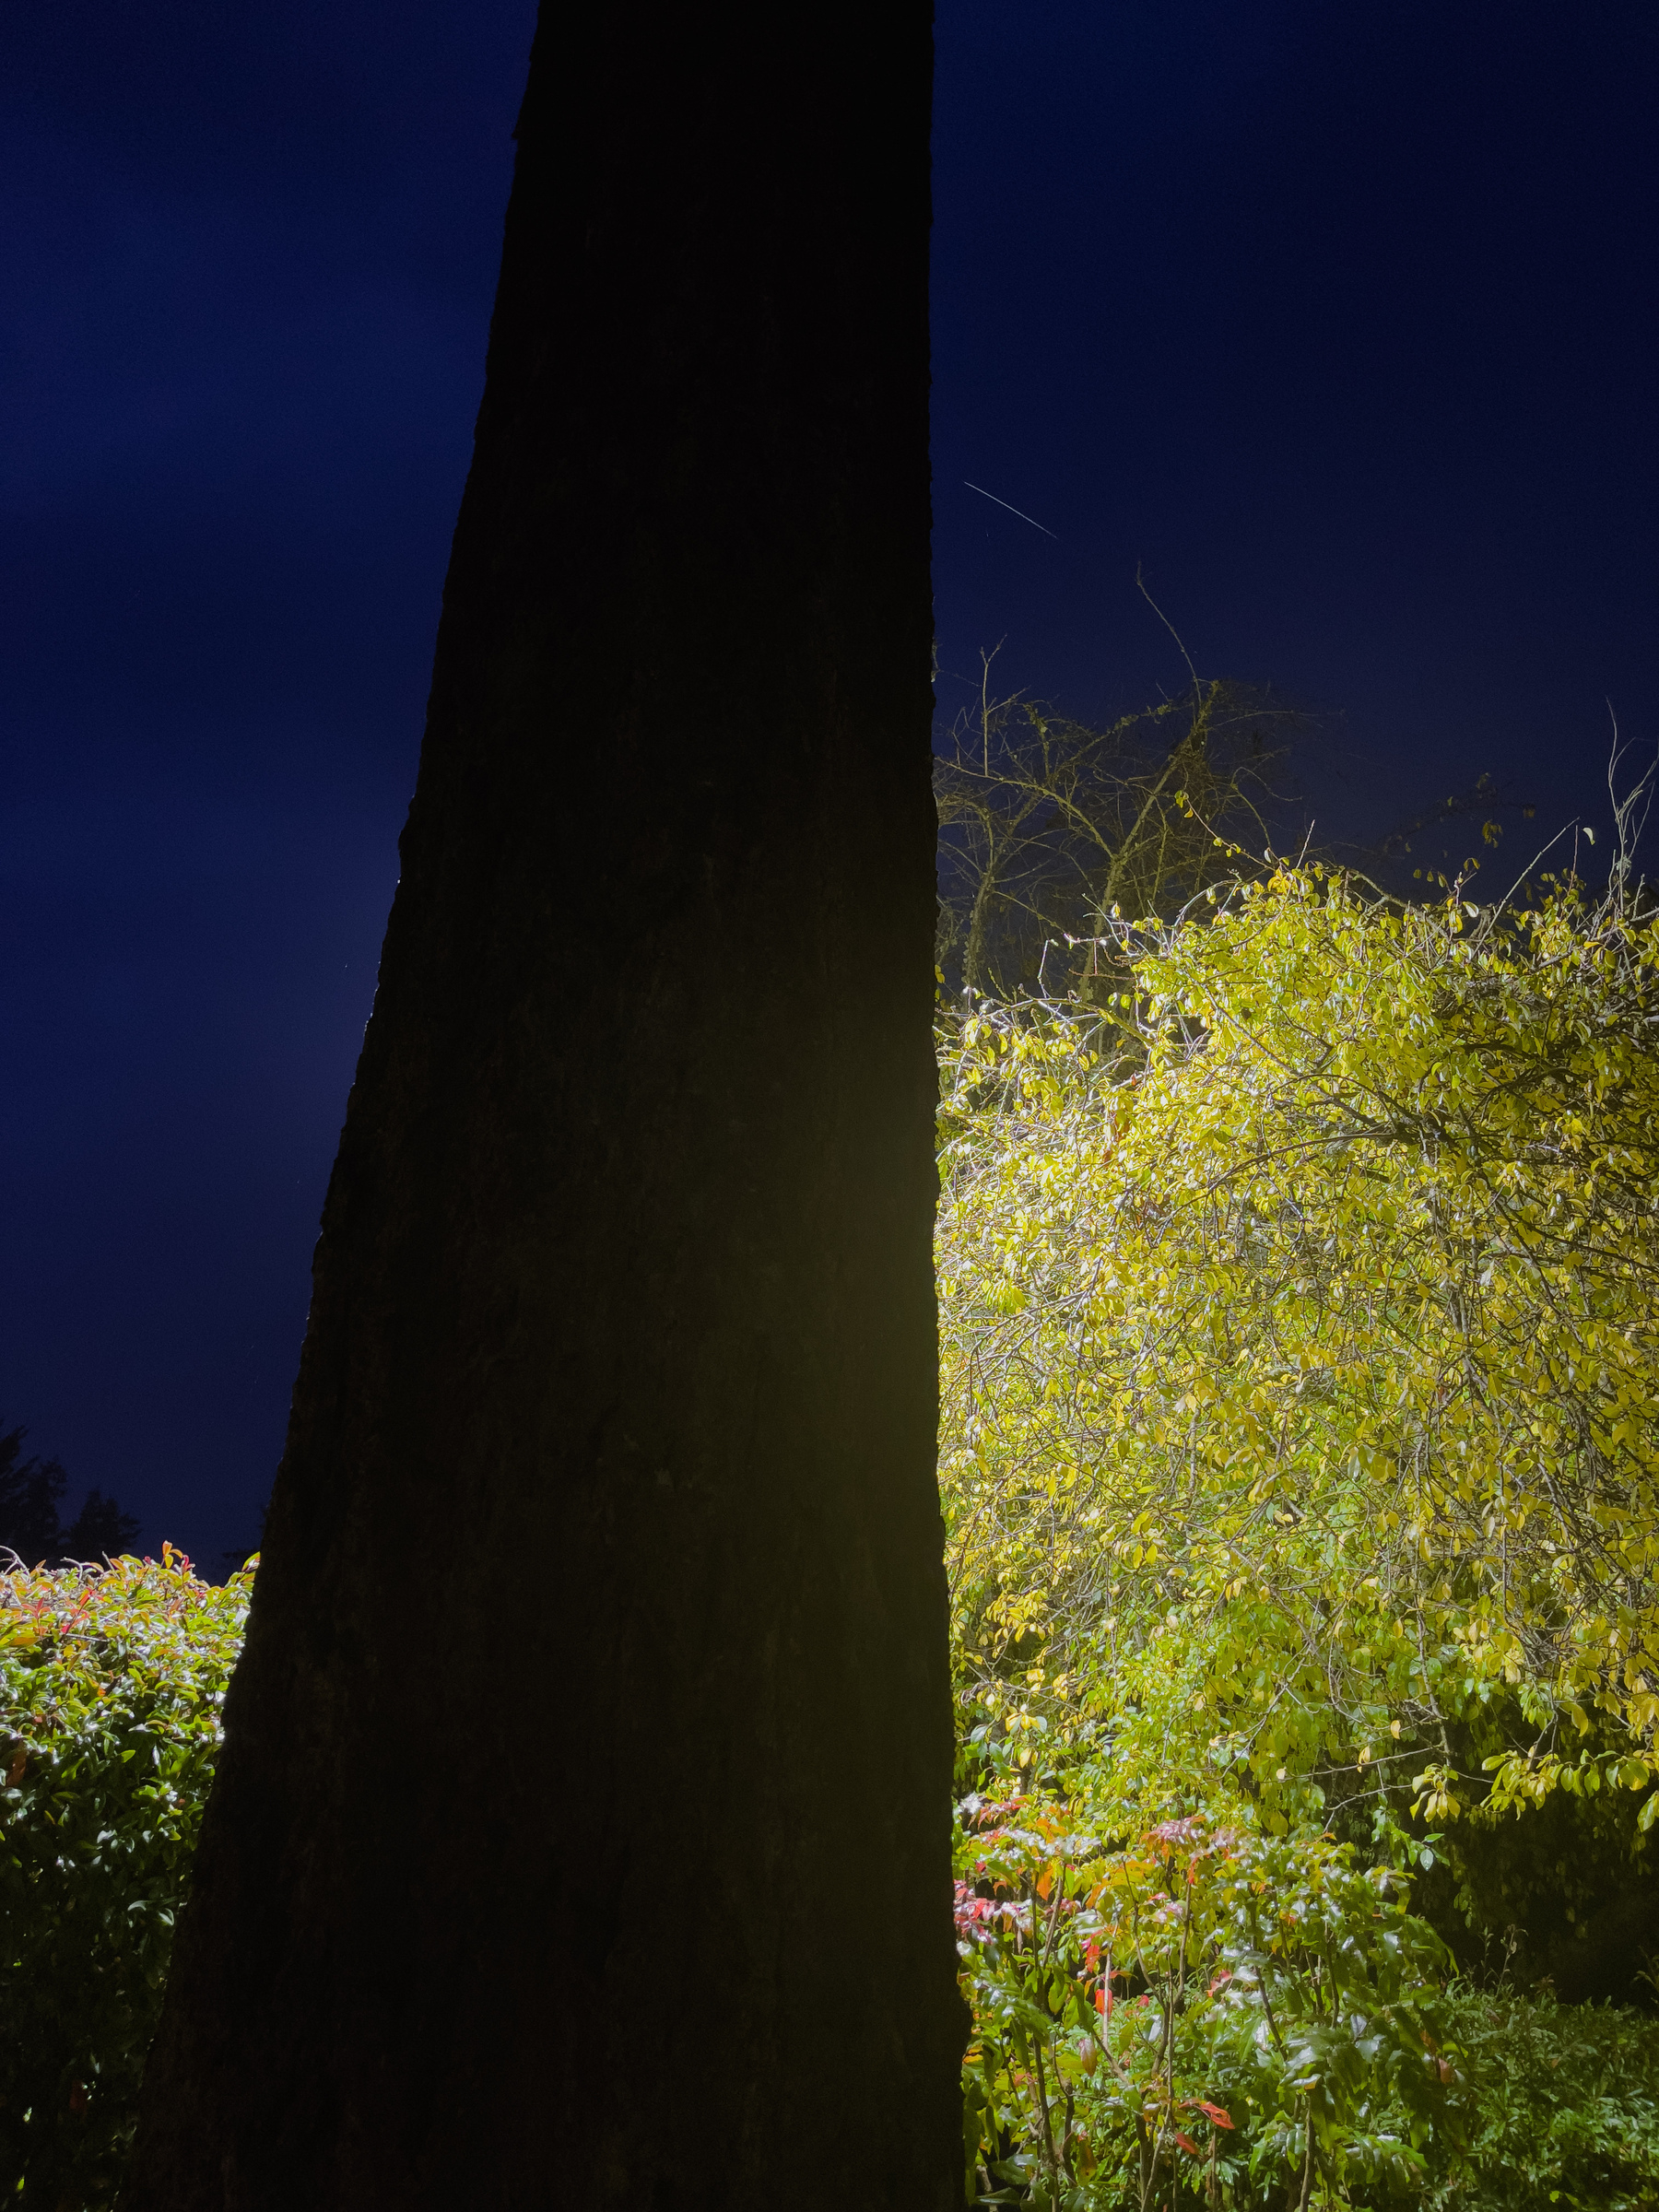 Tree trunk in silhouette with shrubs illuminated by streetlights beyond.